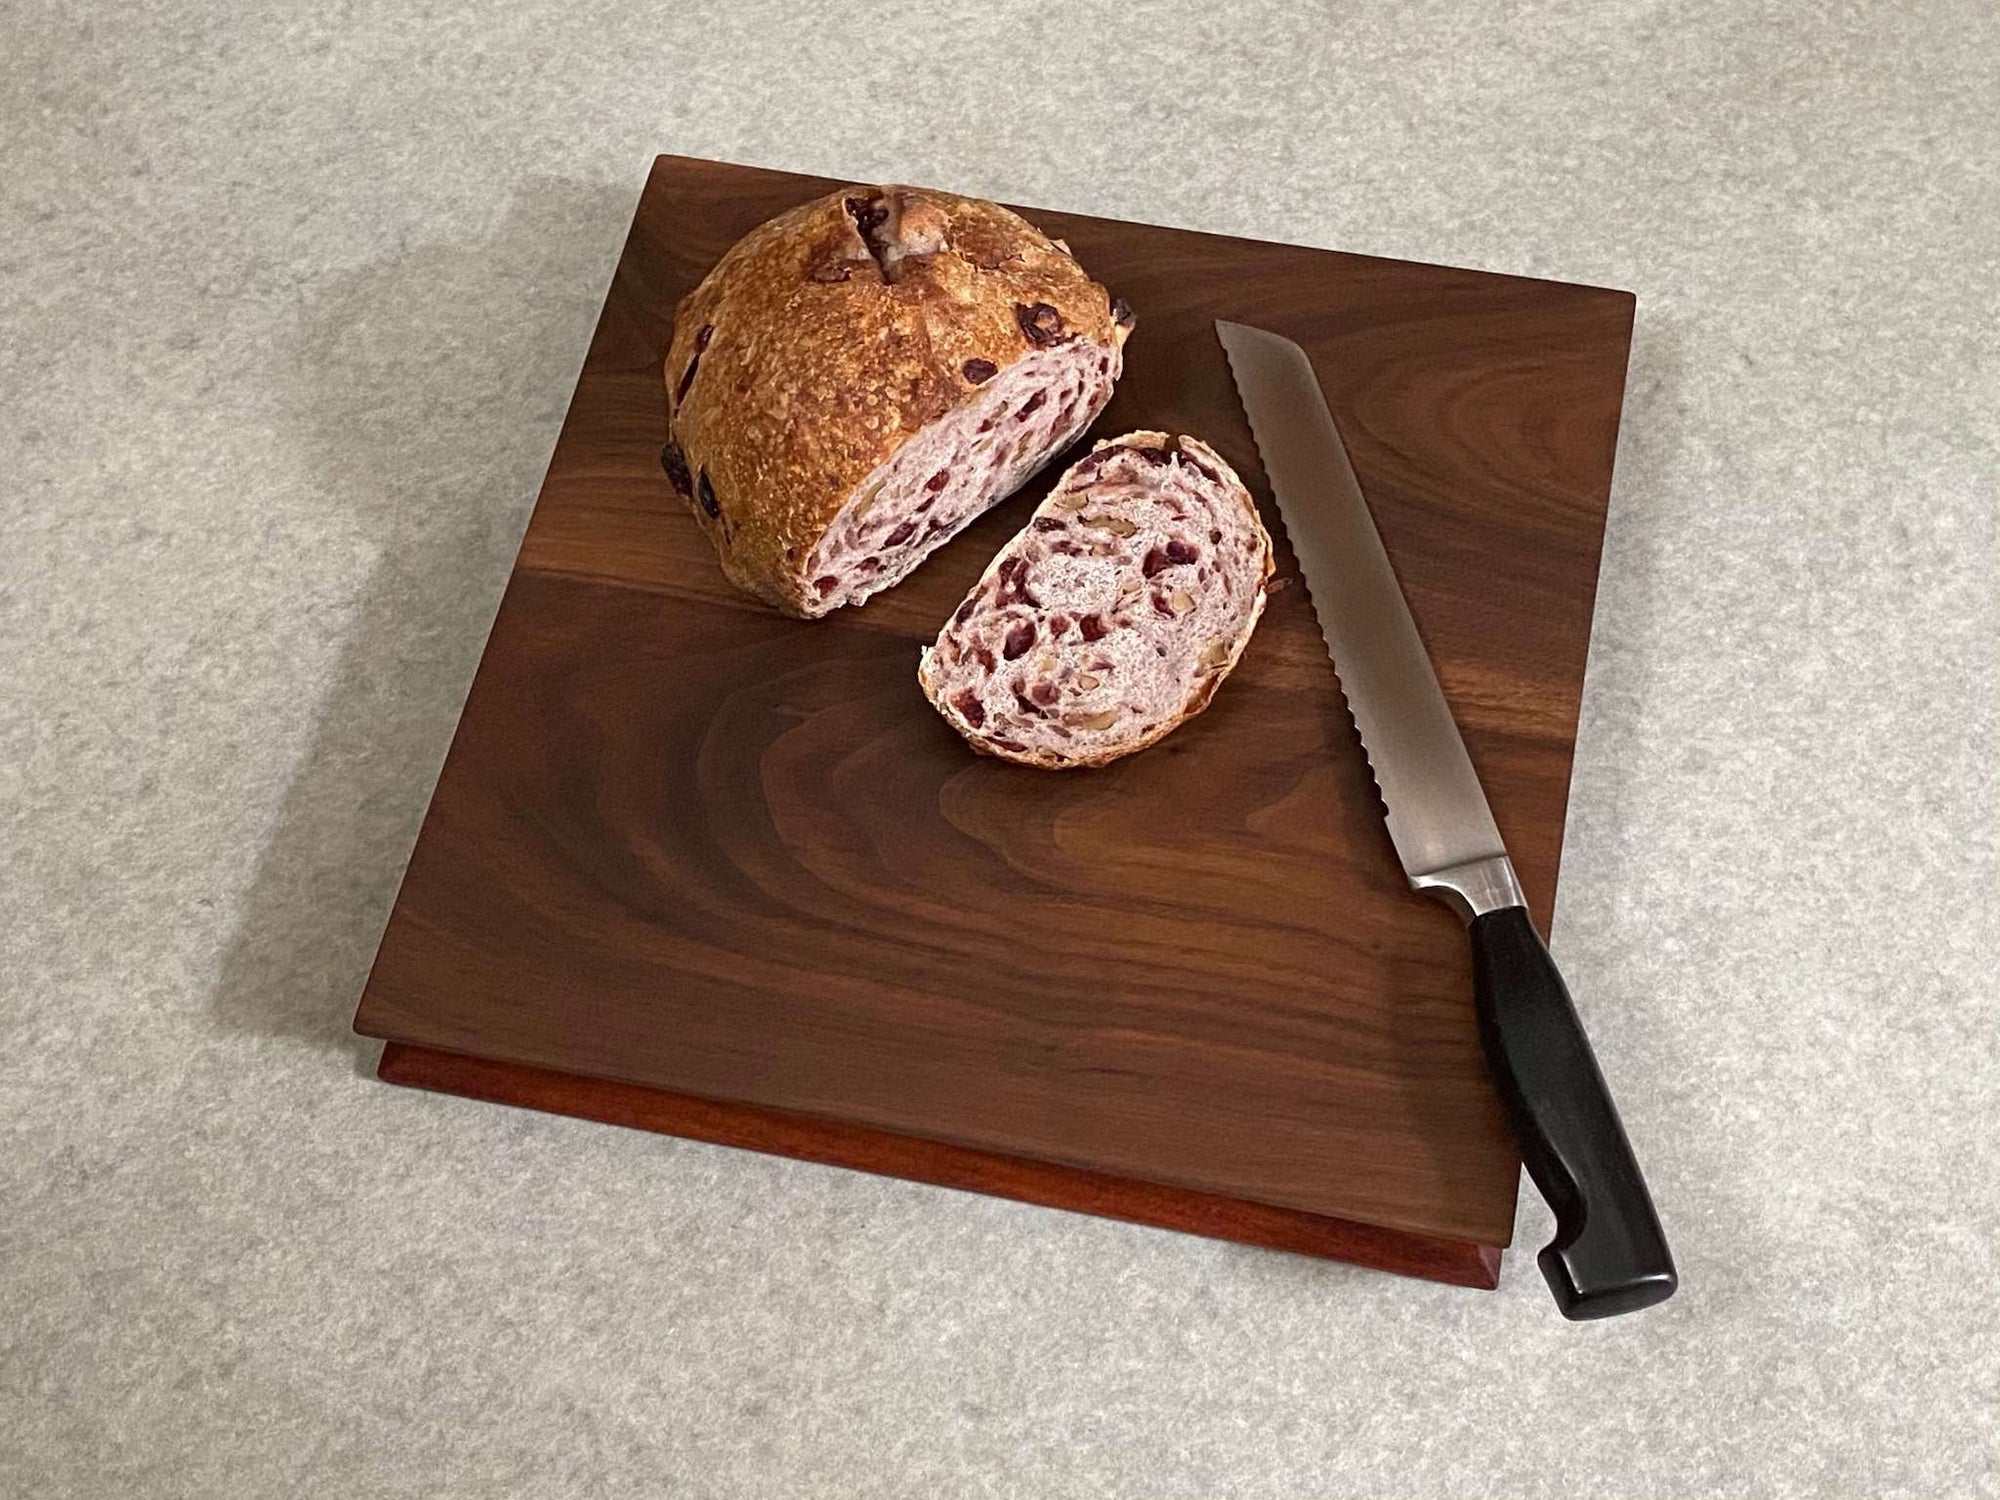 Square cutting and serving board made of mahogany on one side and walnut on the reverse. Sculpted edges provide comfortable fingerholds.